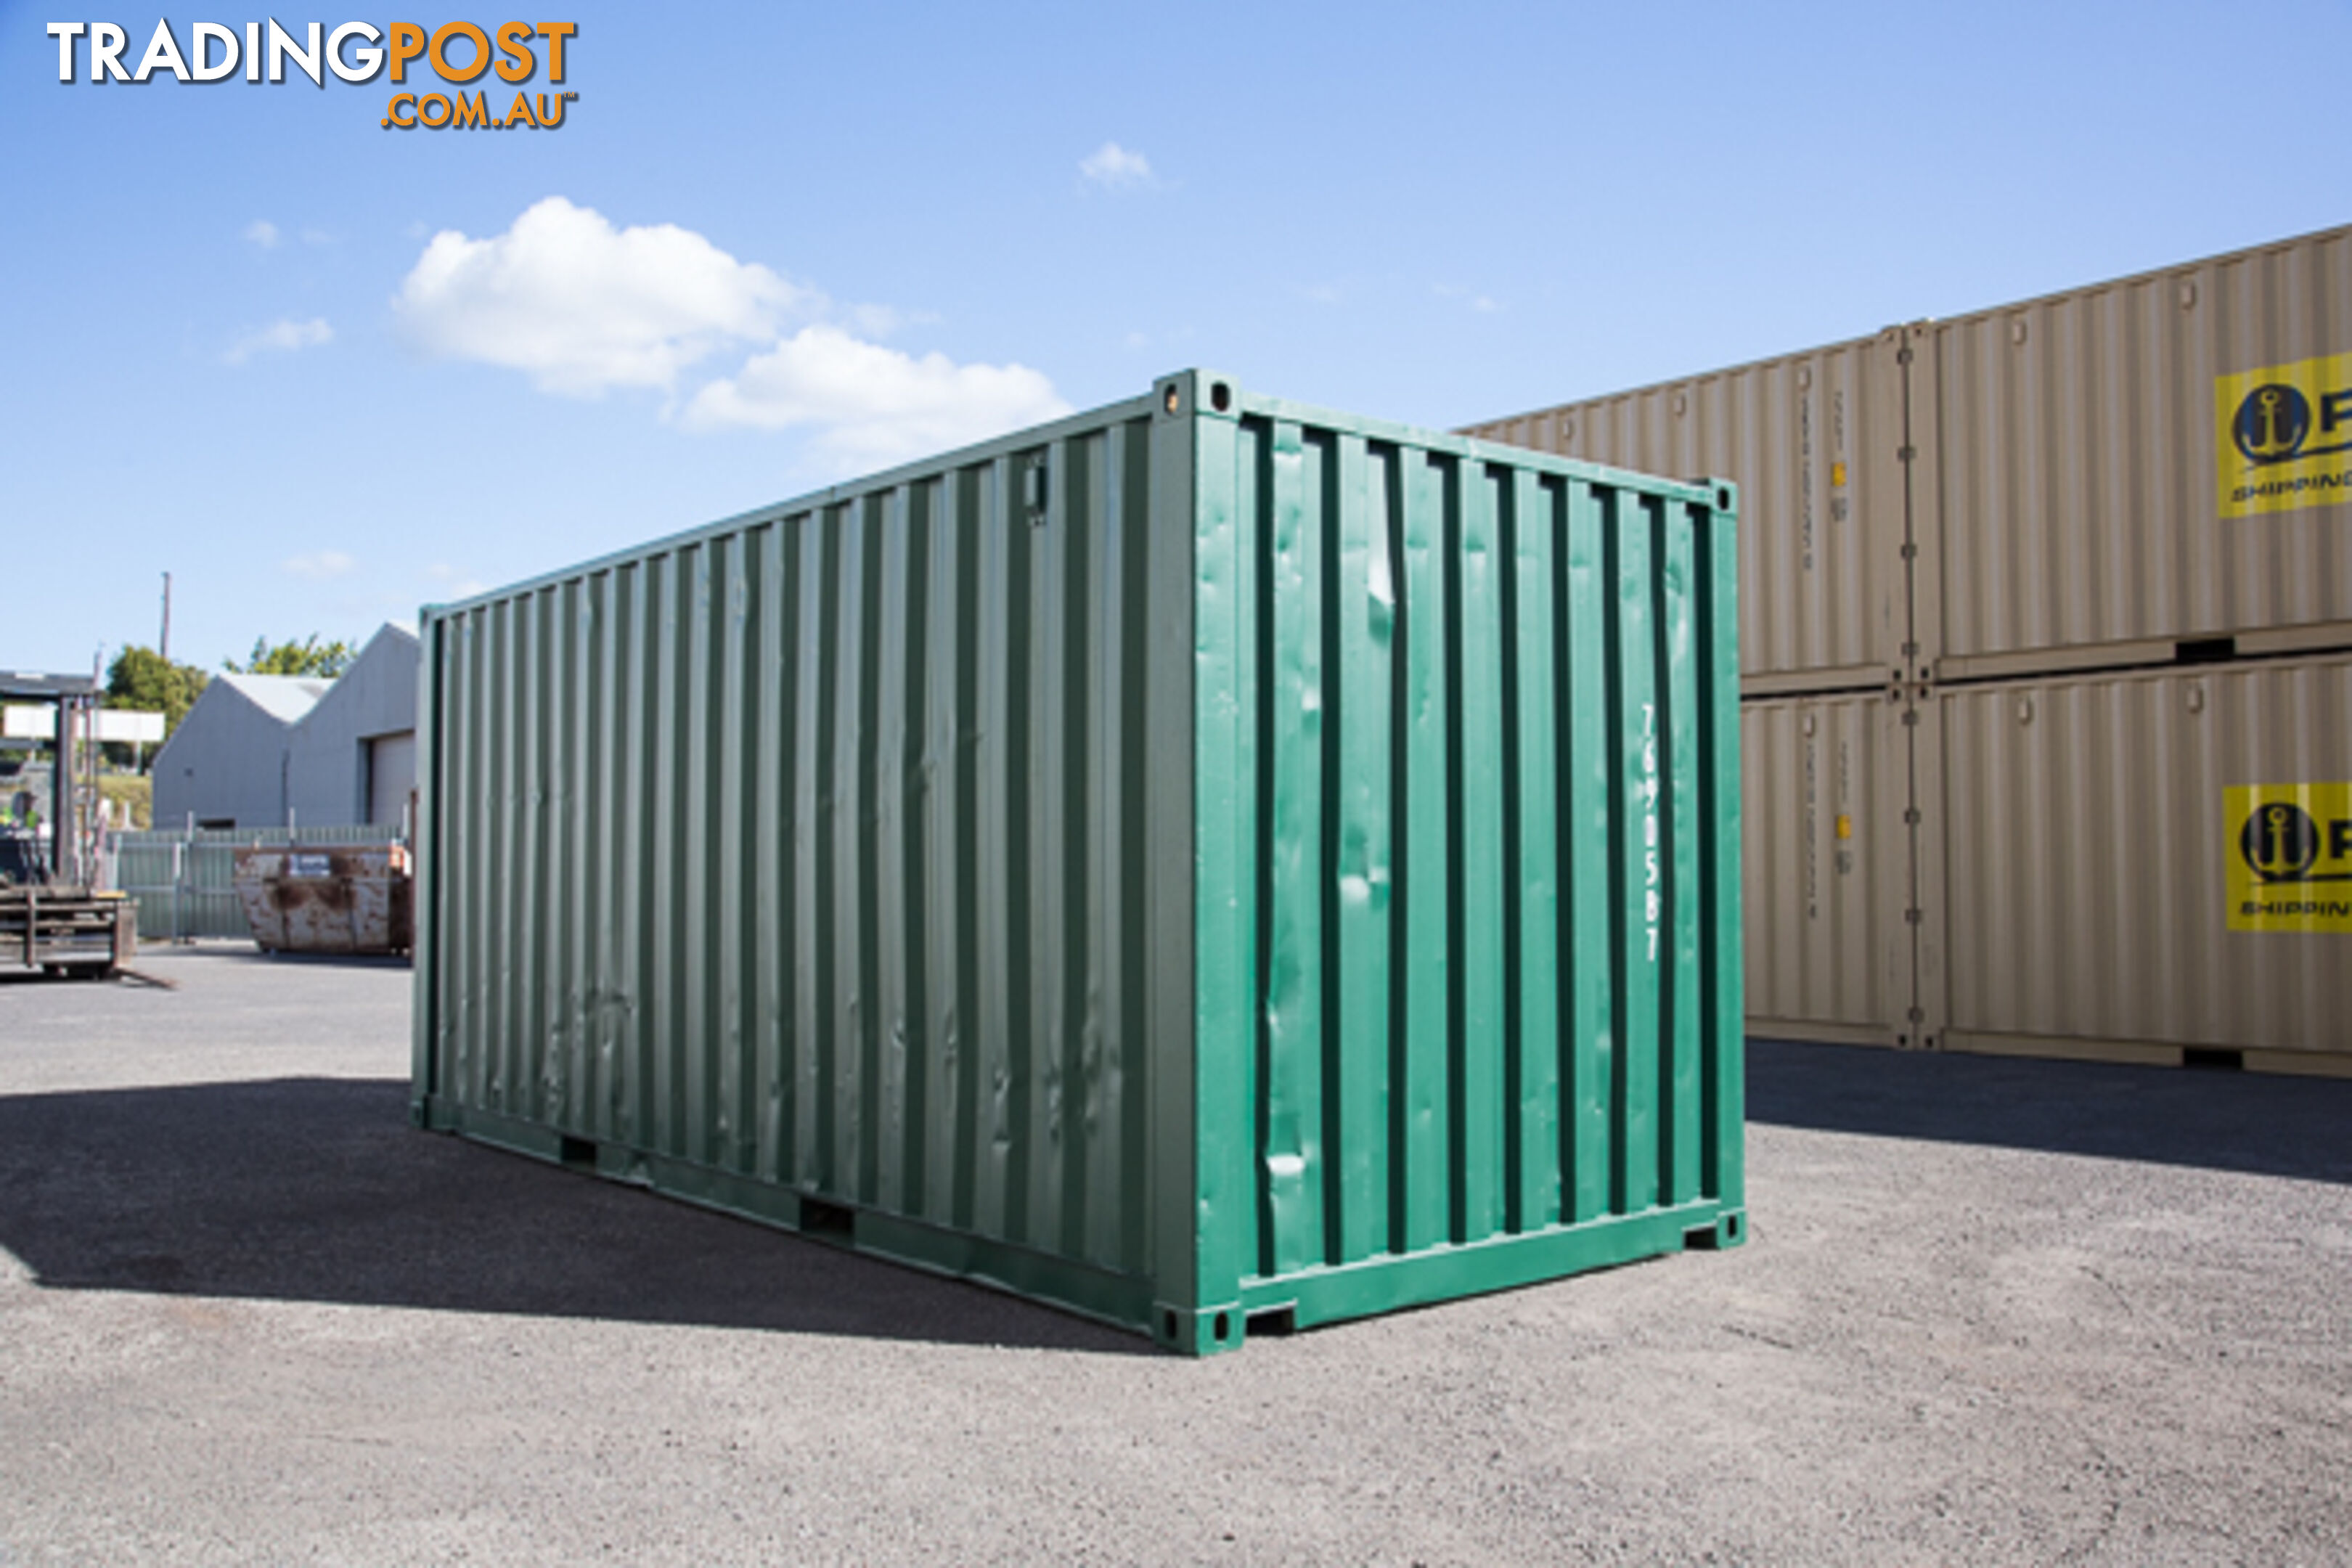 Refurbished Painted 20ft Shipping Containers Childers - From $3900 + GST